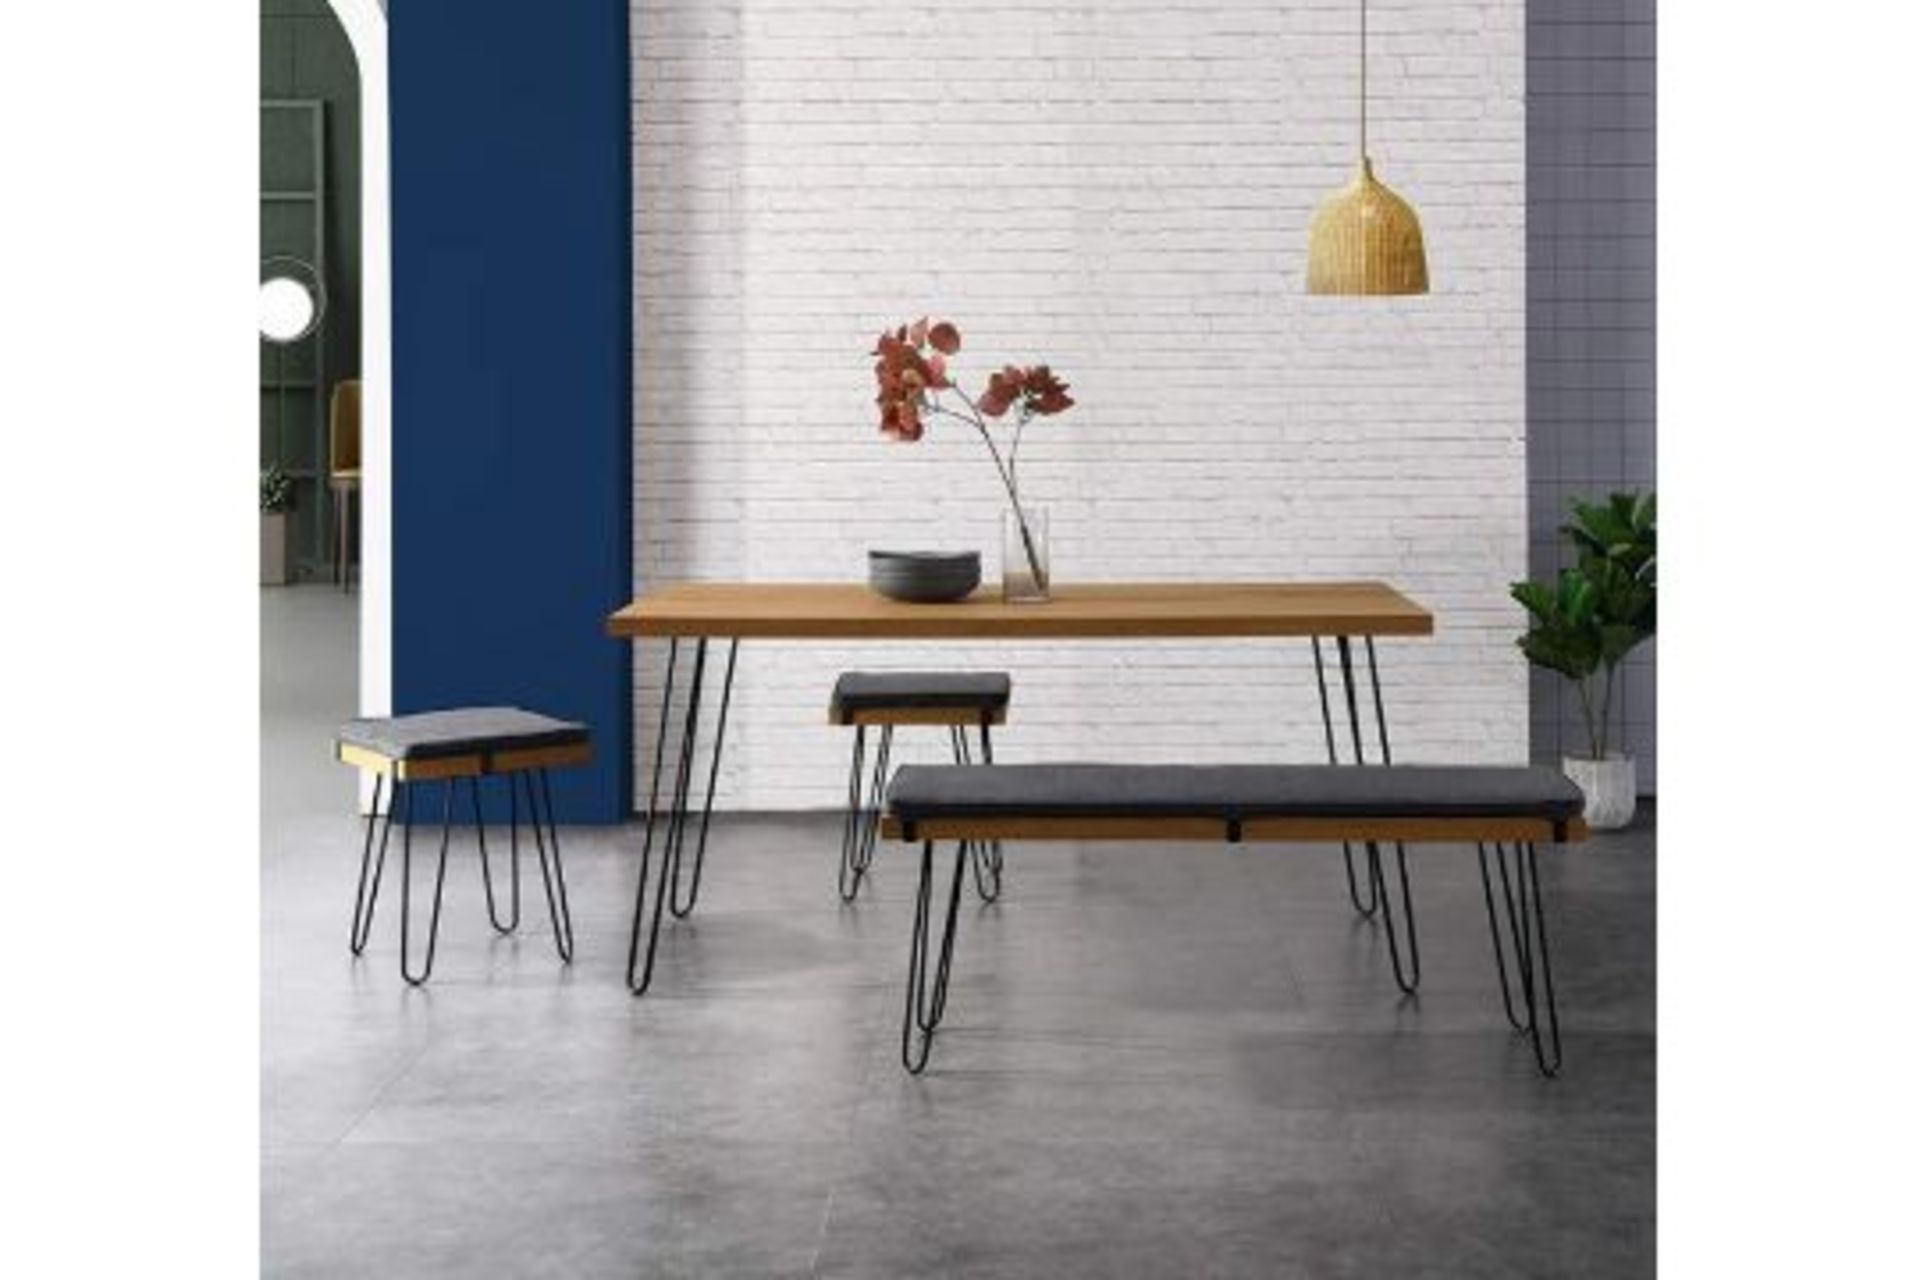 MEILEN Oak Dining Table Set RRP £469.99. Our MEILEN dining table is beautifully made combining